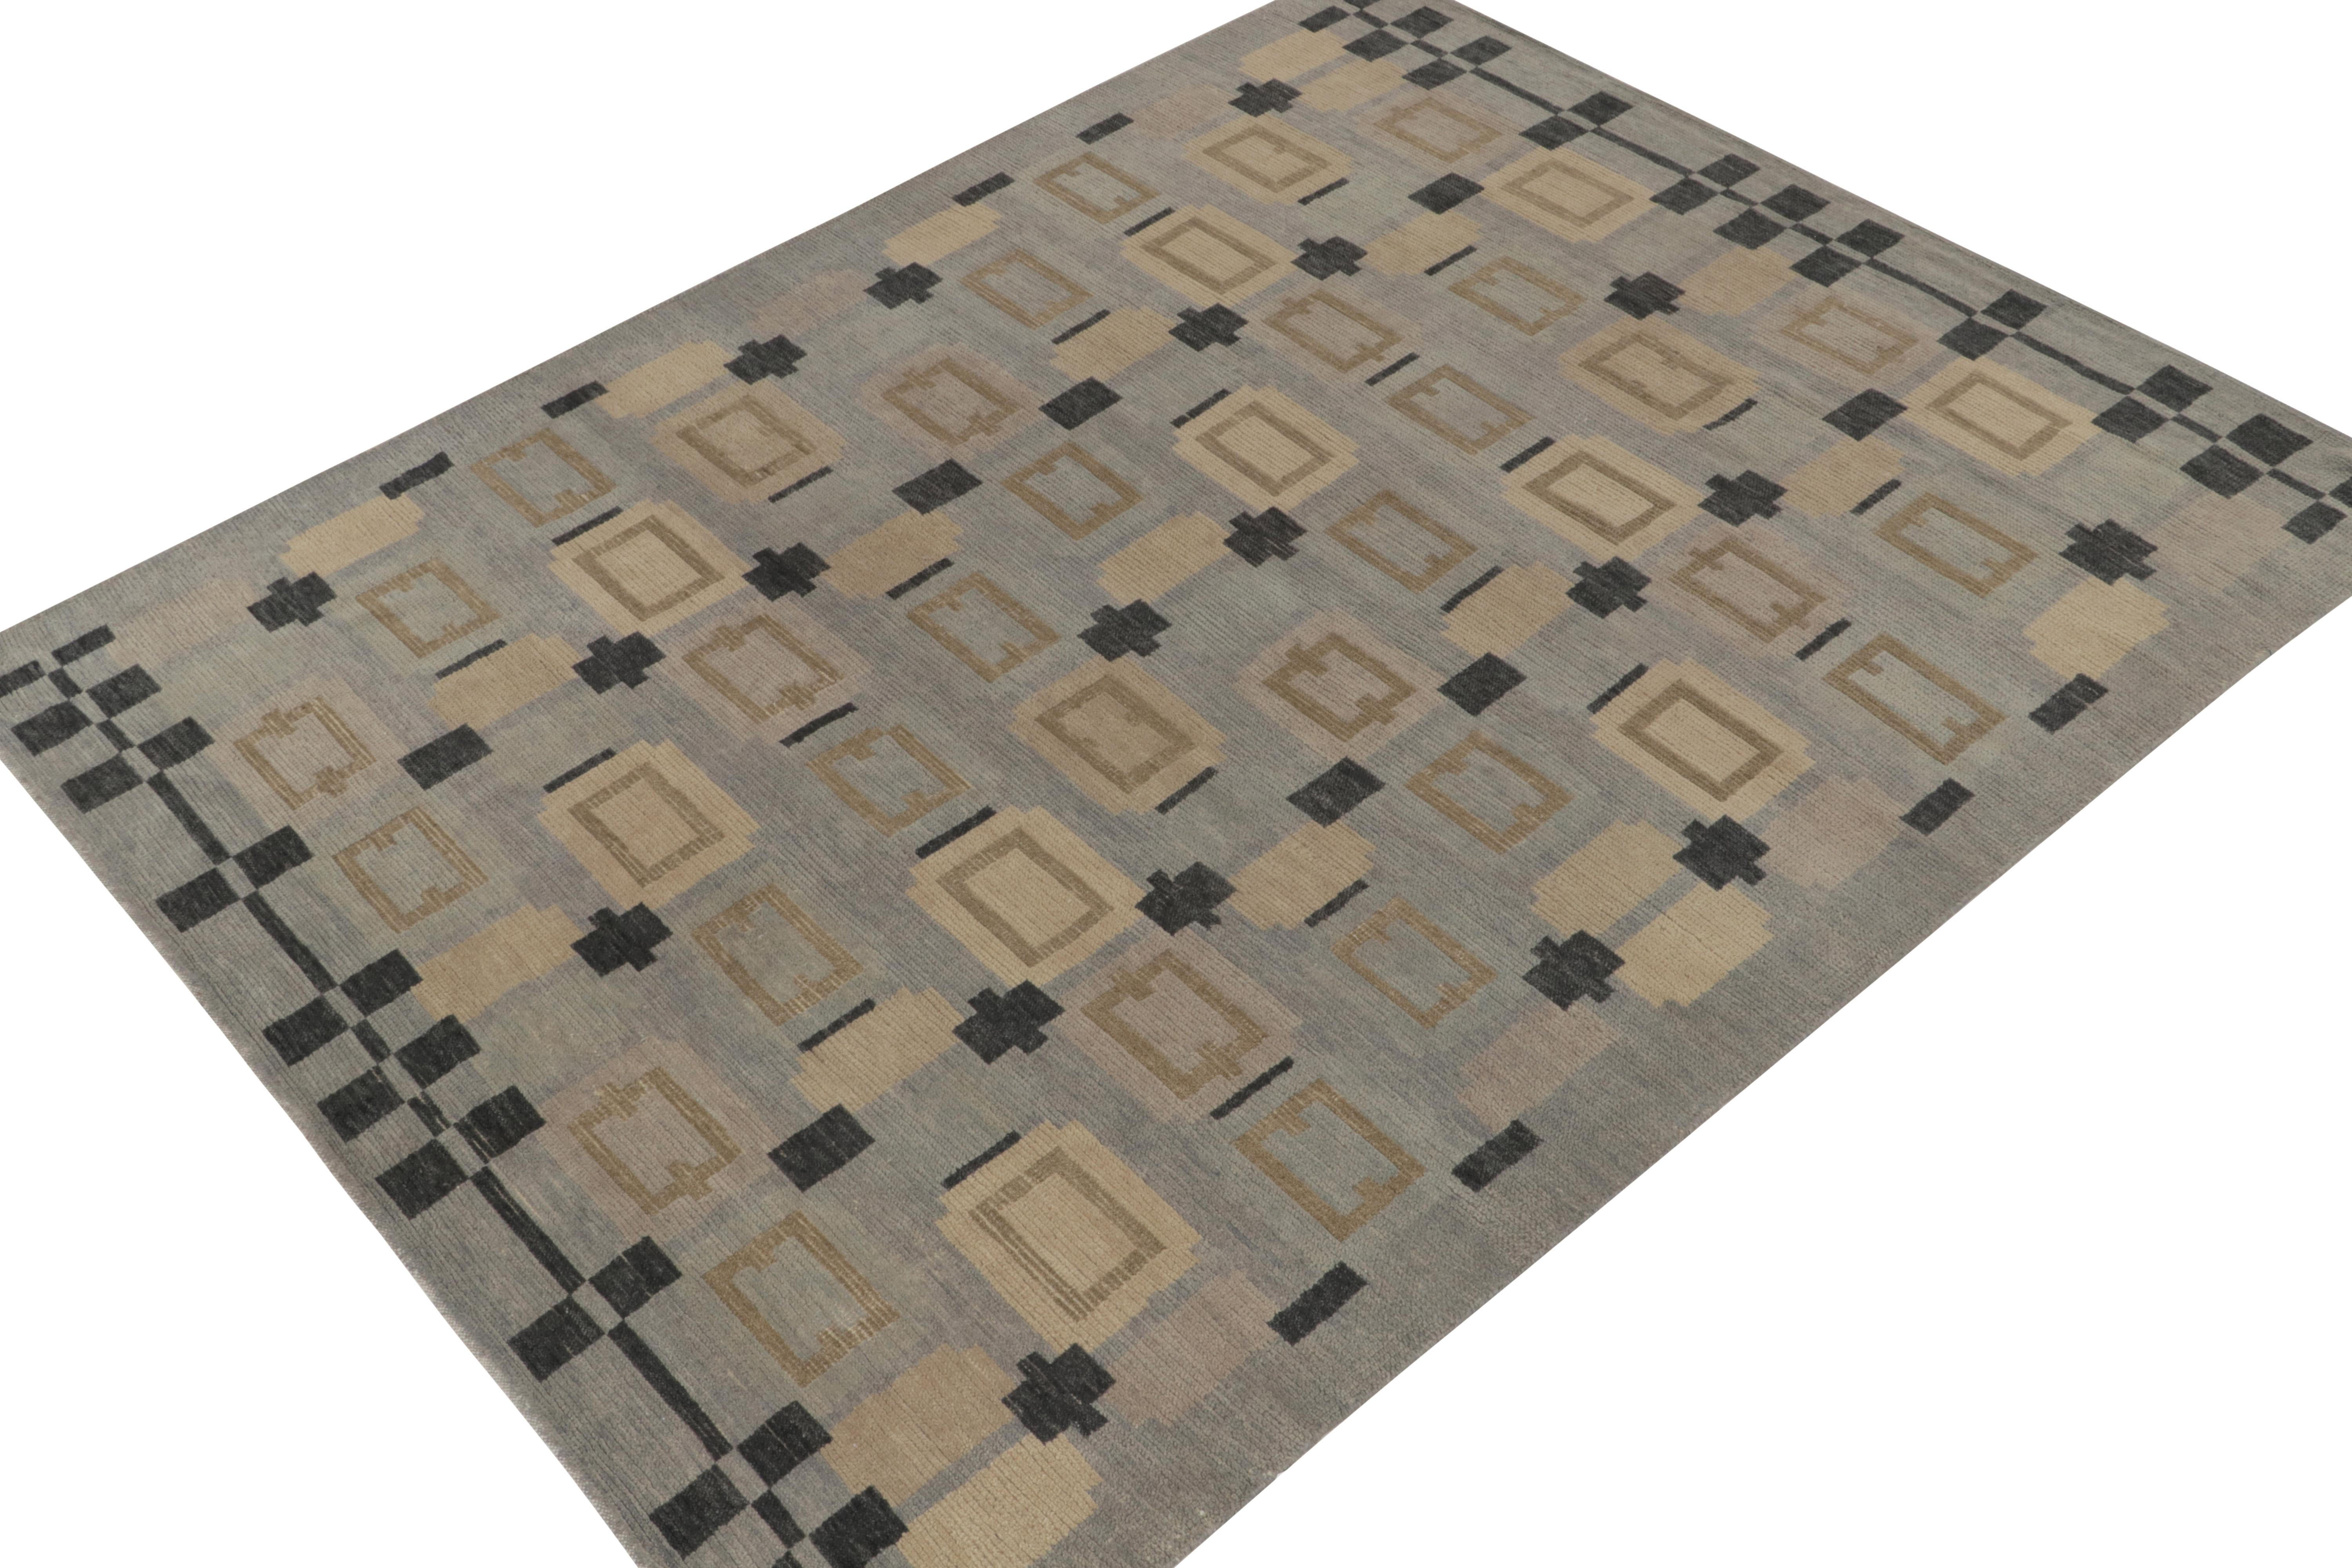 Rug & Kilim’s innovative take on Scandinavian style, from our celebrated finer weave line of the titular award-winning collection. 

On the Design: This 8x10 rug recaptures the finesse of Swedish Deco aesthetics with a smart geometric pattern in